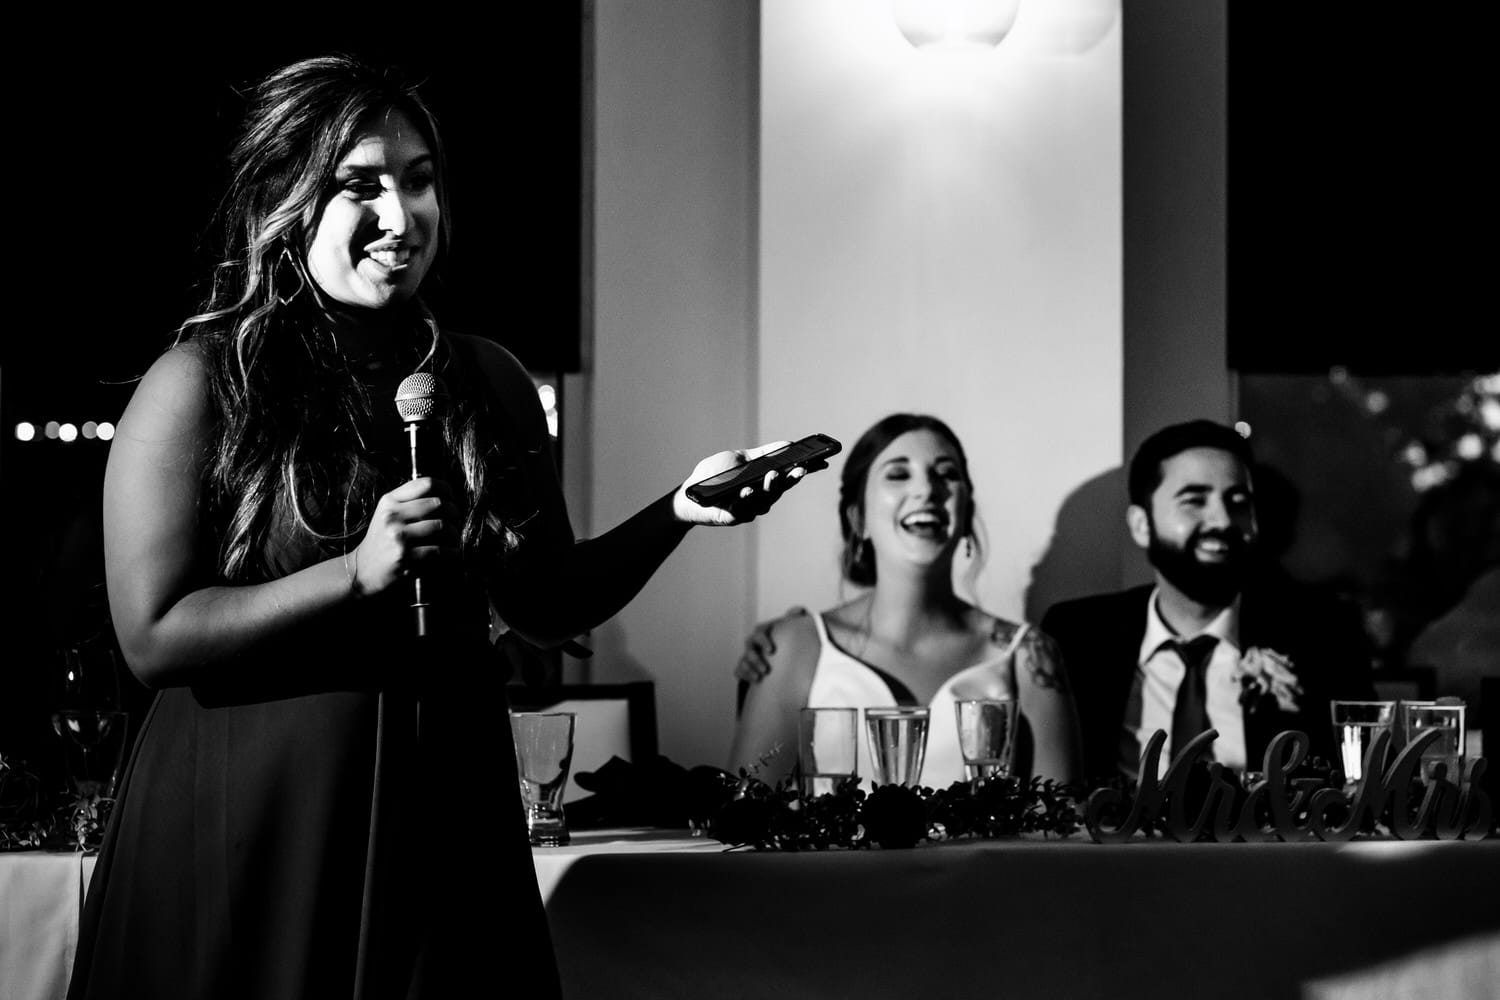 A candid black and white picture of a bridesmaid giving a toast, the bride and groom visible behind her during a classic reception at The Grand Street Cafe in Kansas City. 